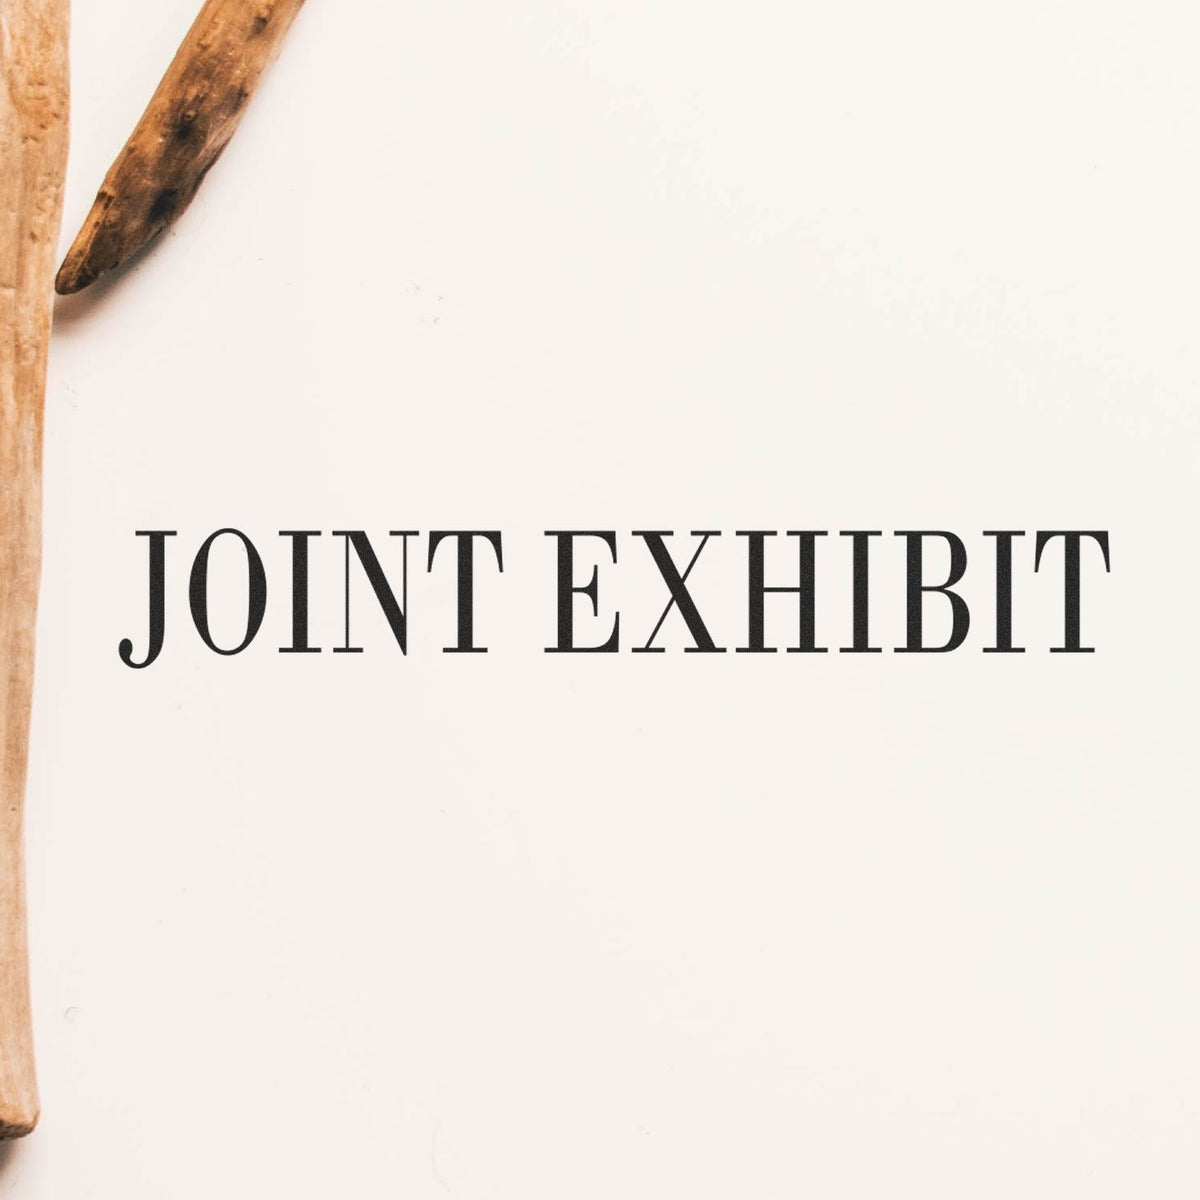 Joint Exhibit Rubber Stamp Lifestyle Photo